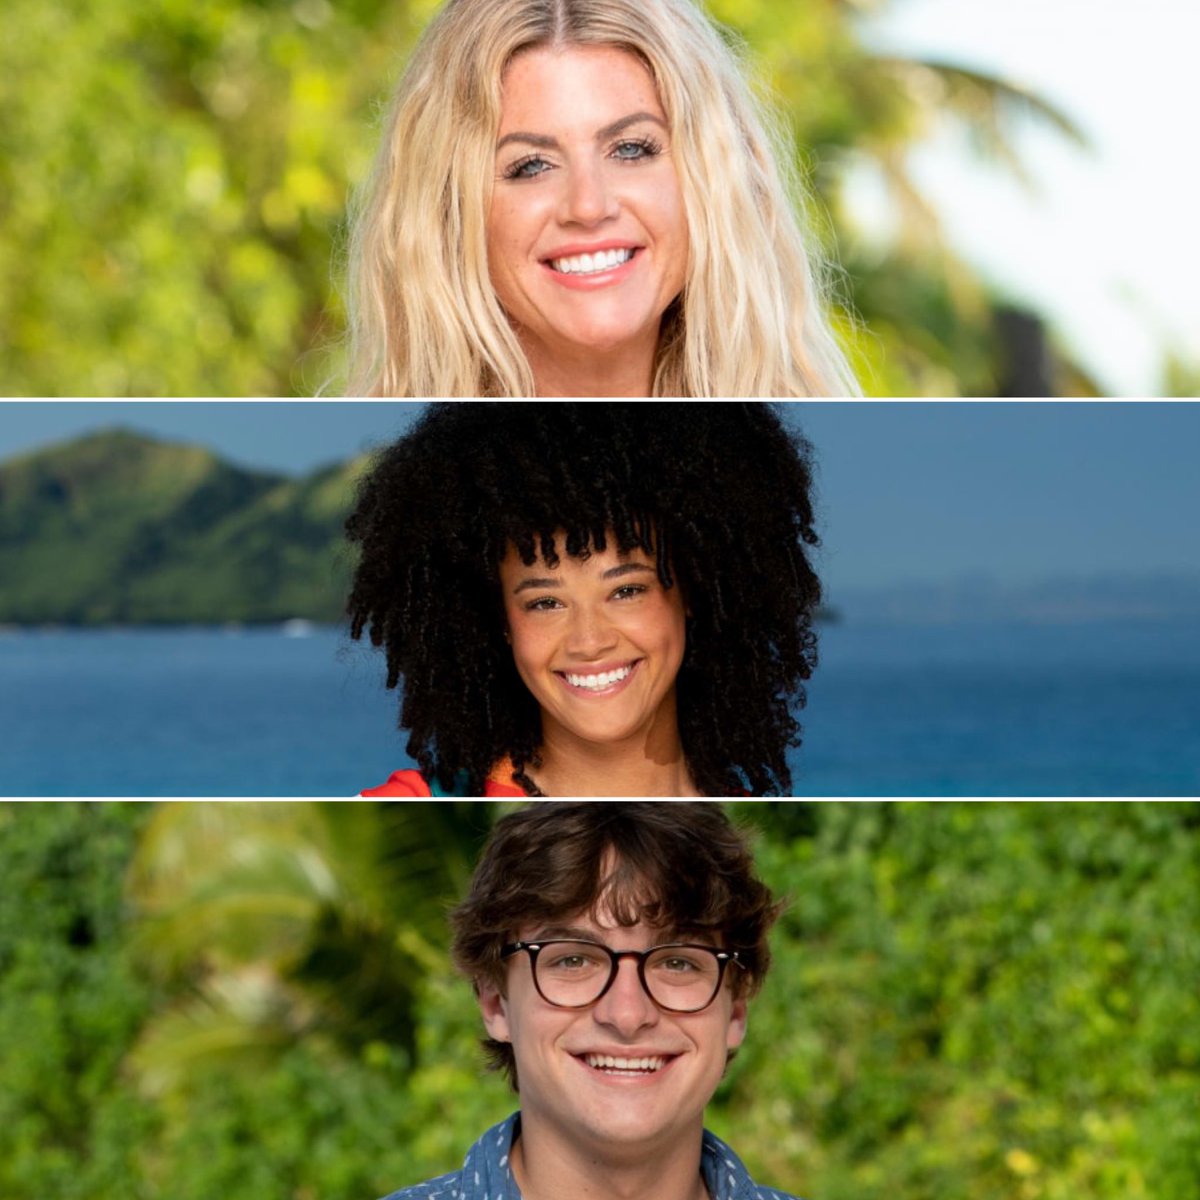 Sia awarded a total of $130,000 to her favorite contestants on this season of #Survivor: 

Carolyn Wiger: $100,000
Lauren Harpe: $15,000
Carson Garrett: $15,000